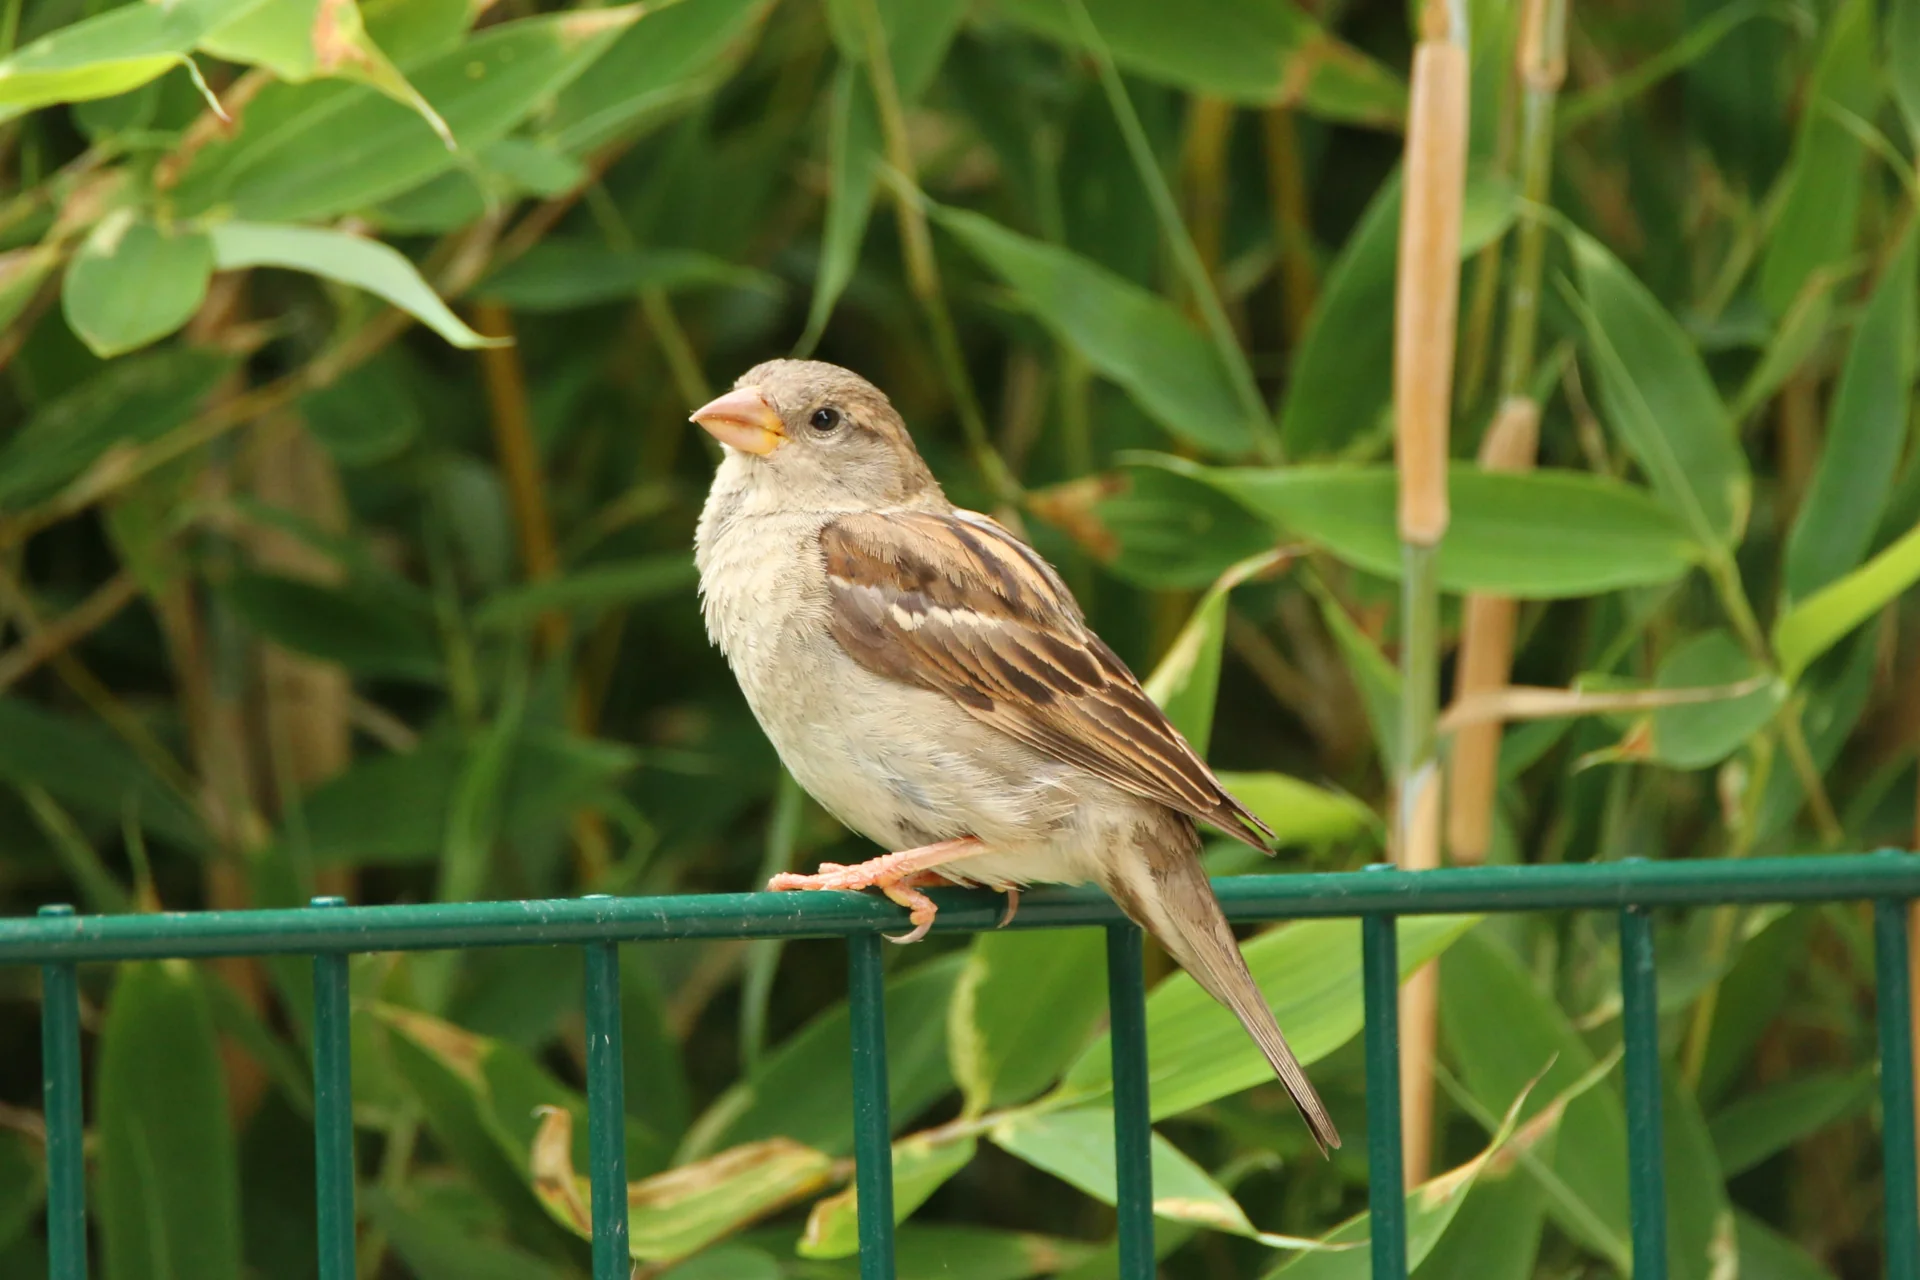 A sparrow sitting on a green painted metal fence.